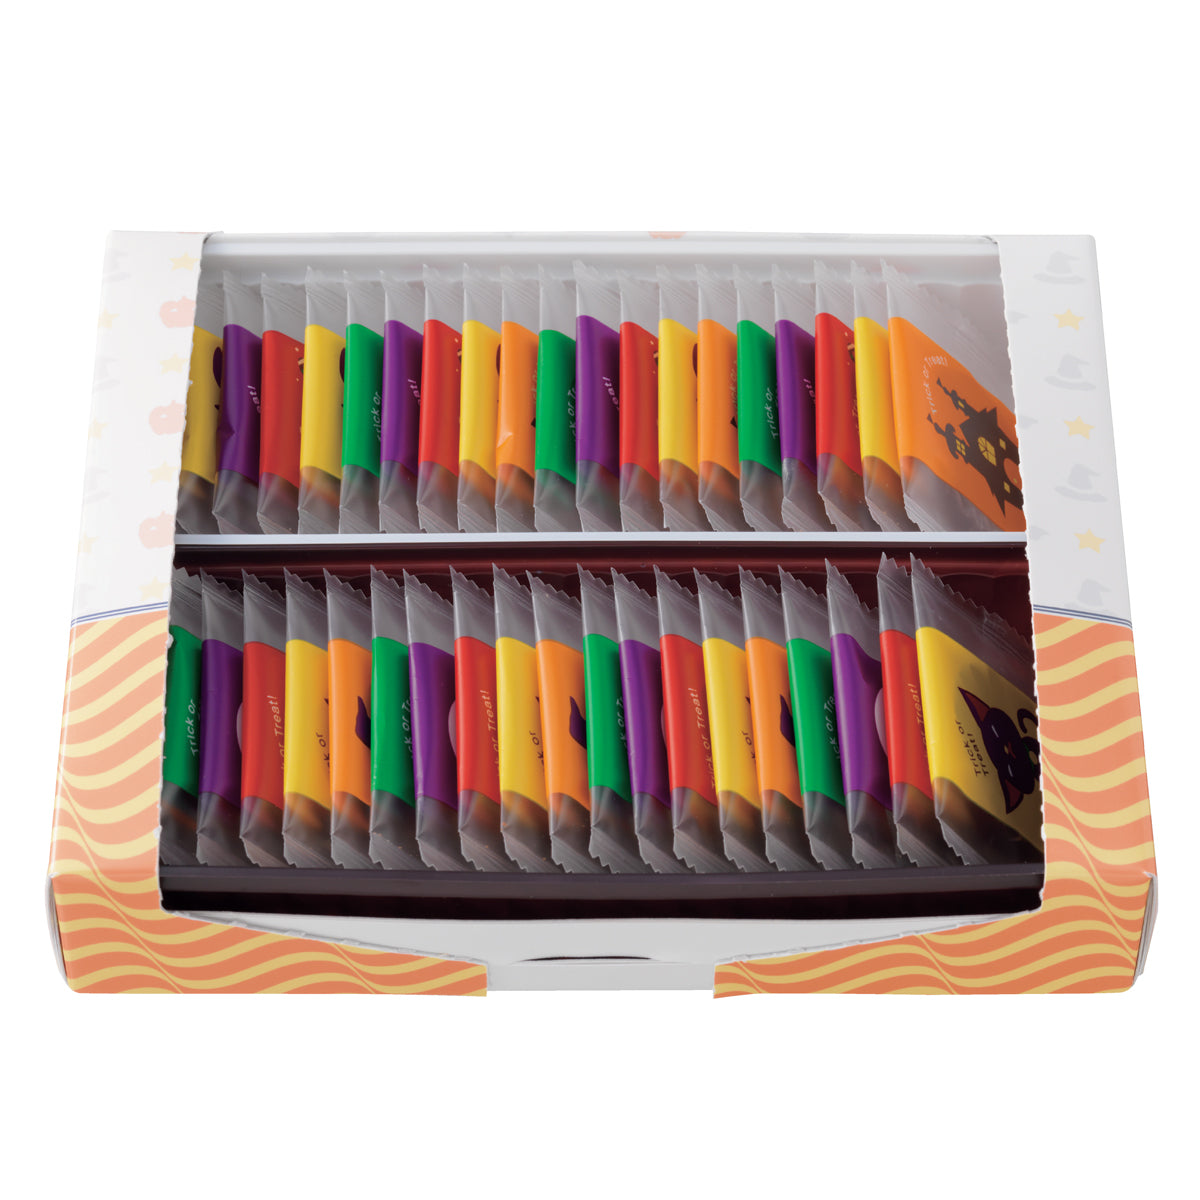 Image shows a box with prints of stars, pumpkins, hats, and stripes. Box inside has rows of individually-wrapped chocolates in wrappers of varying colors.